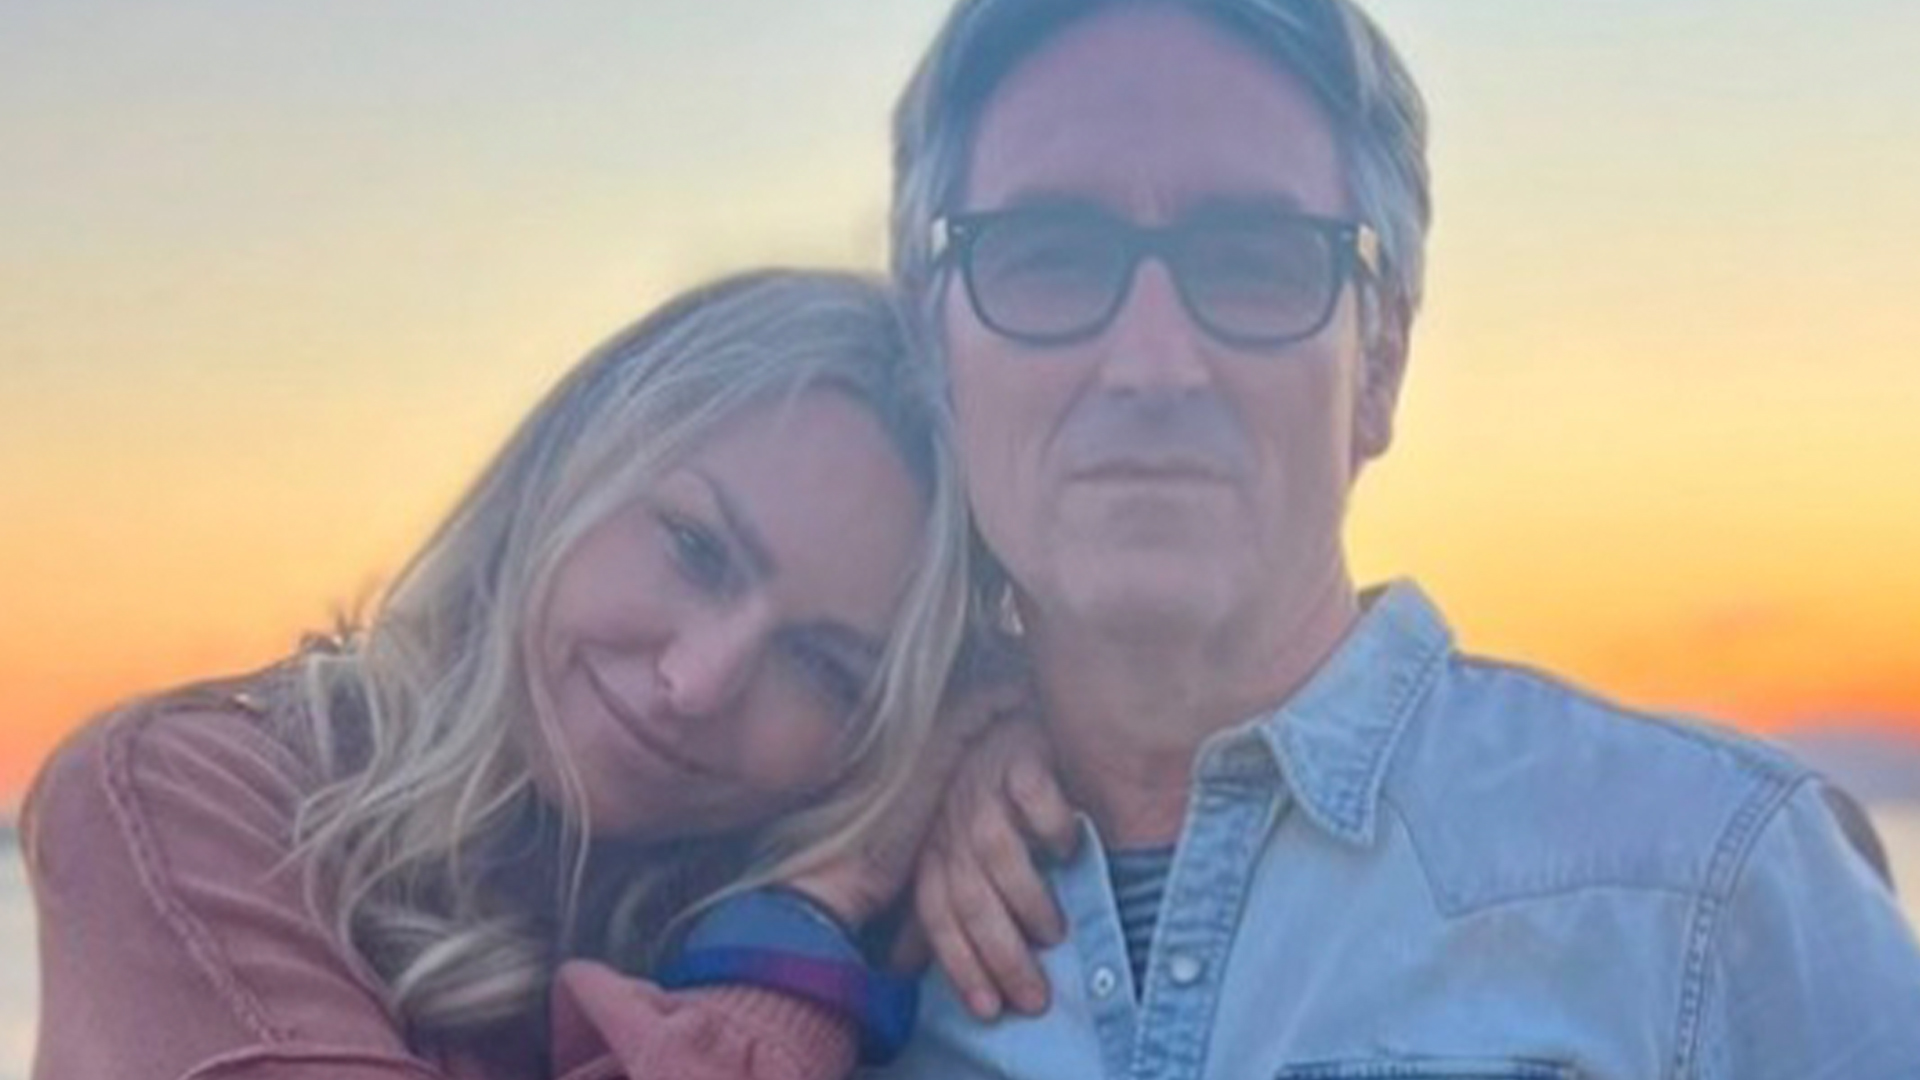 American Pickers’ Mike Wolfe and Leticia Cline share a rare photo as they cuddle on Sweet Getaway